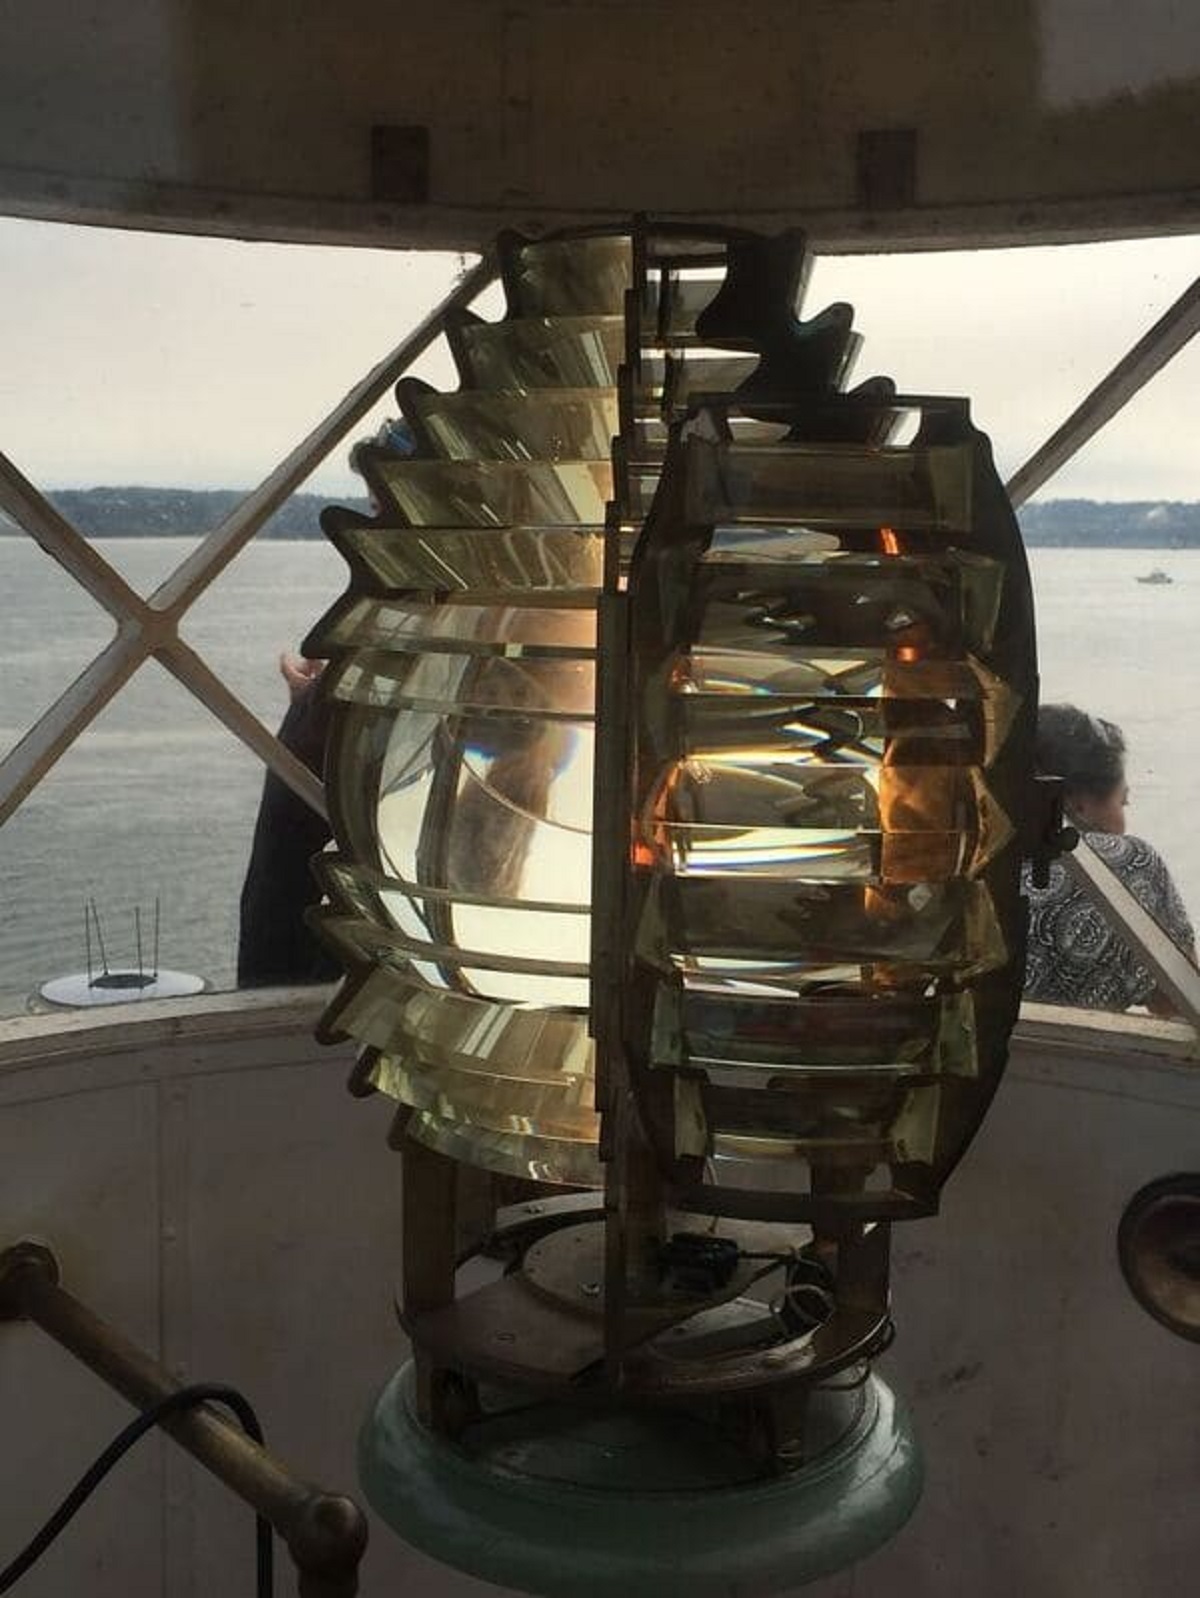 “What The Light Inside A Lighthouse Looks Like (With The Original Fresnel Lens)”